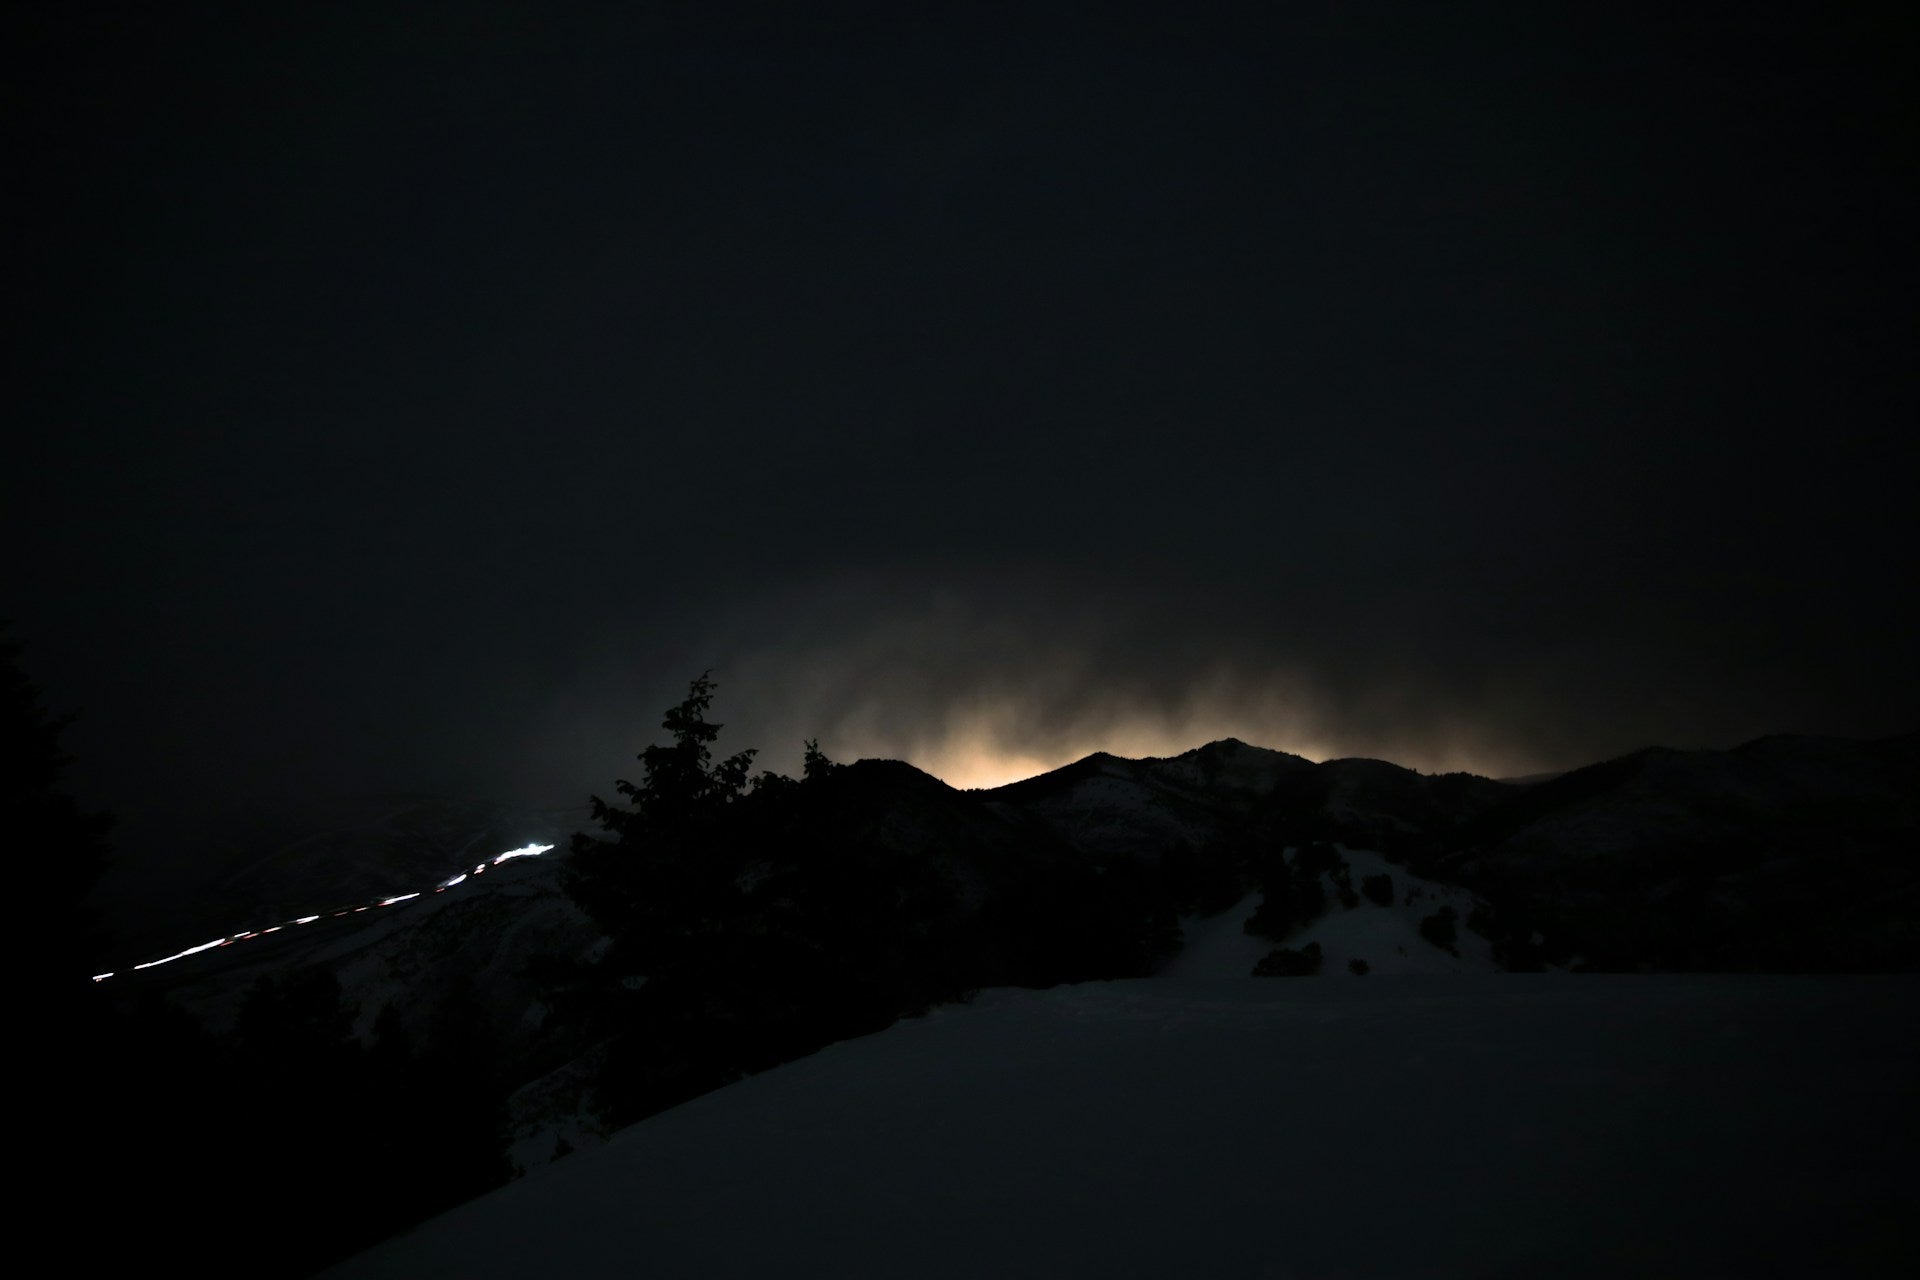 A snow covered mountain at night with a light shining behind it.